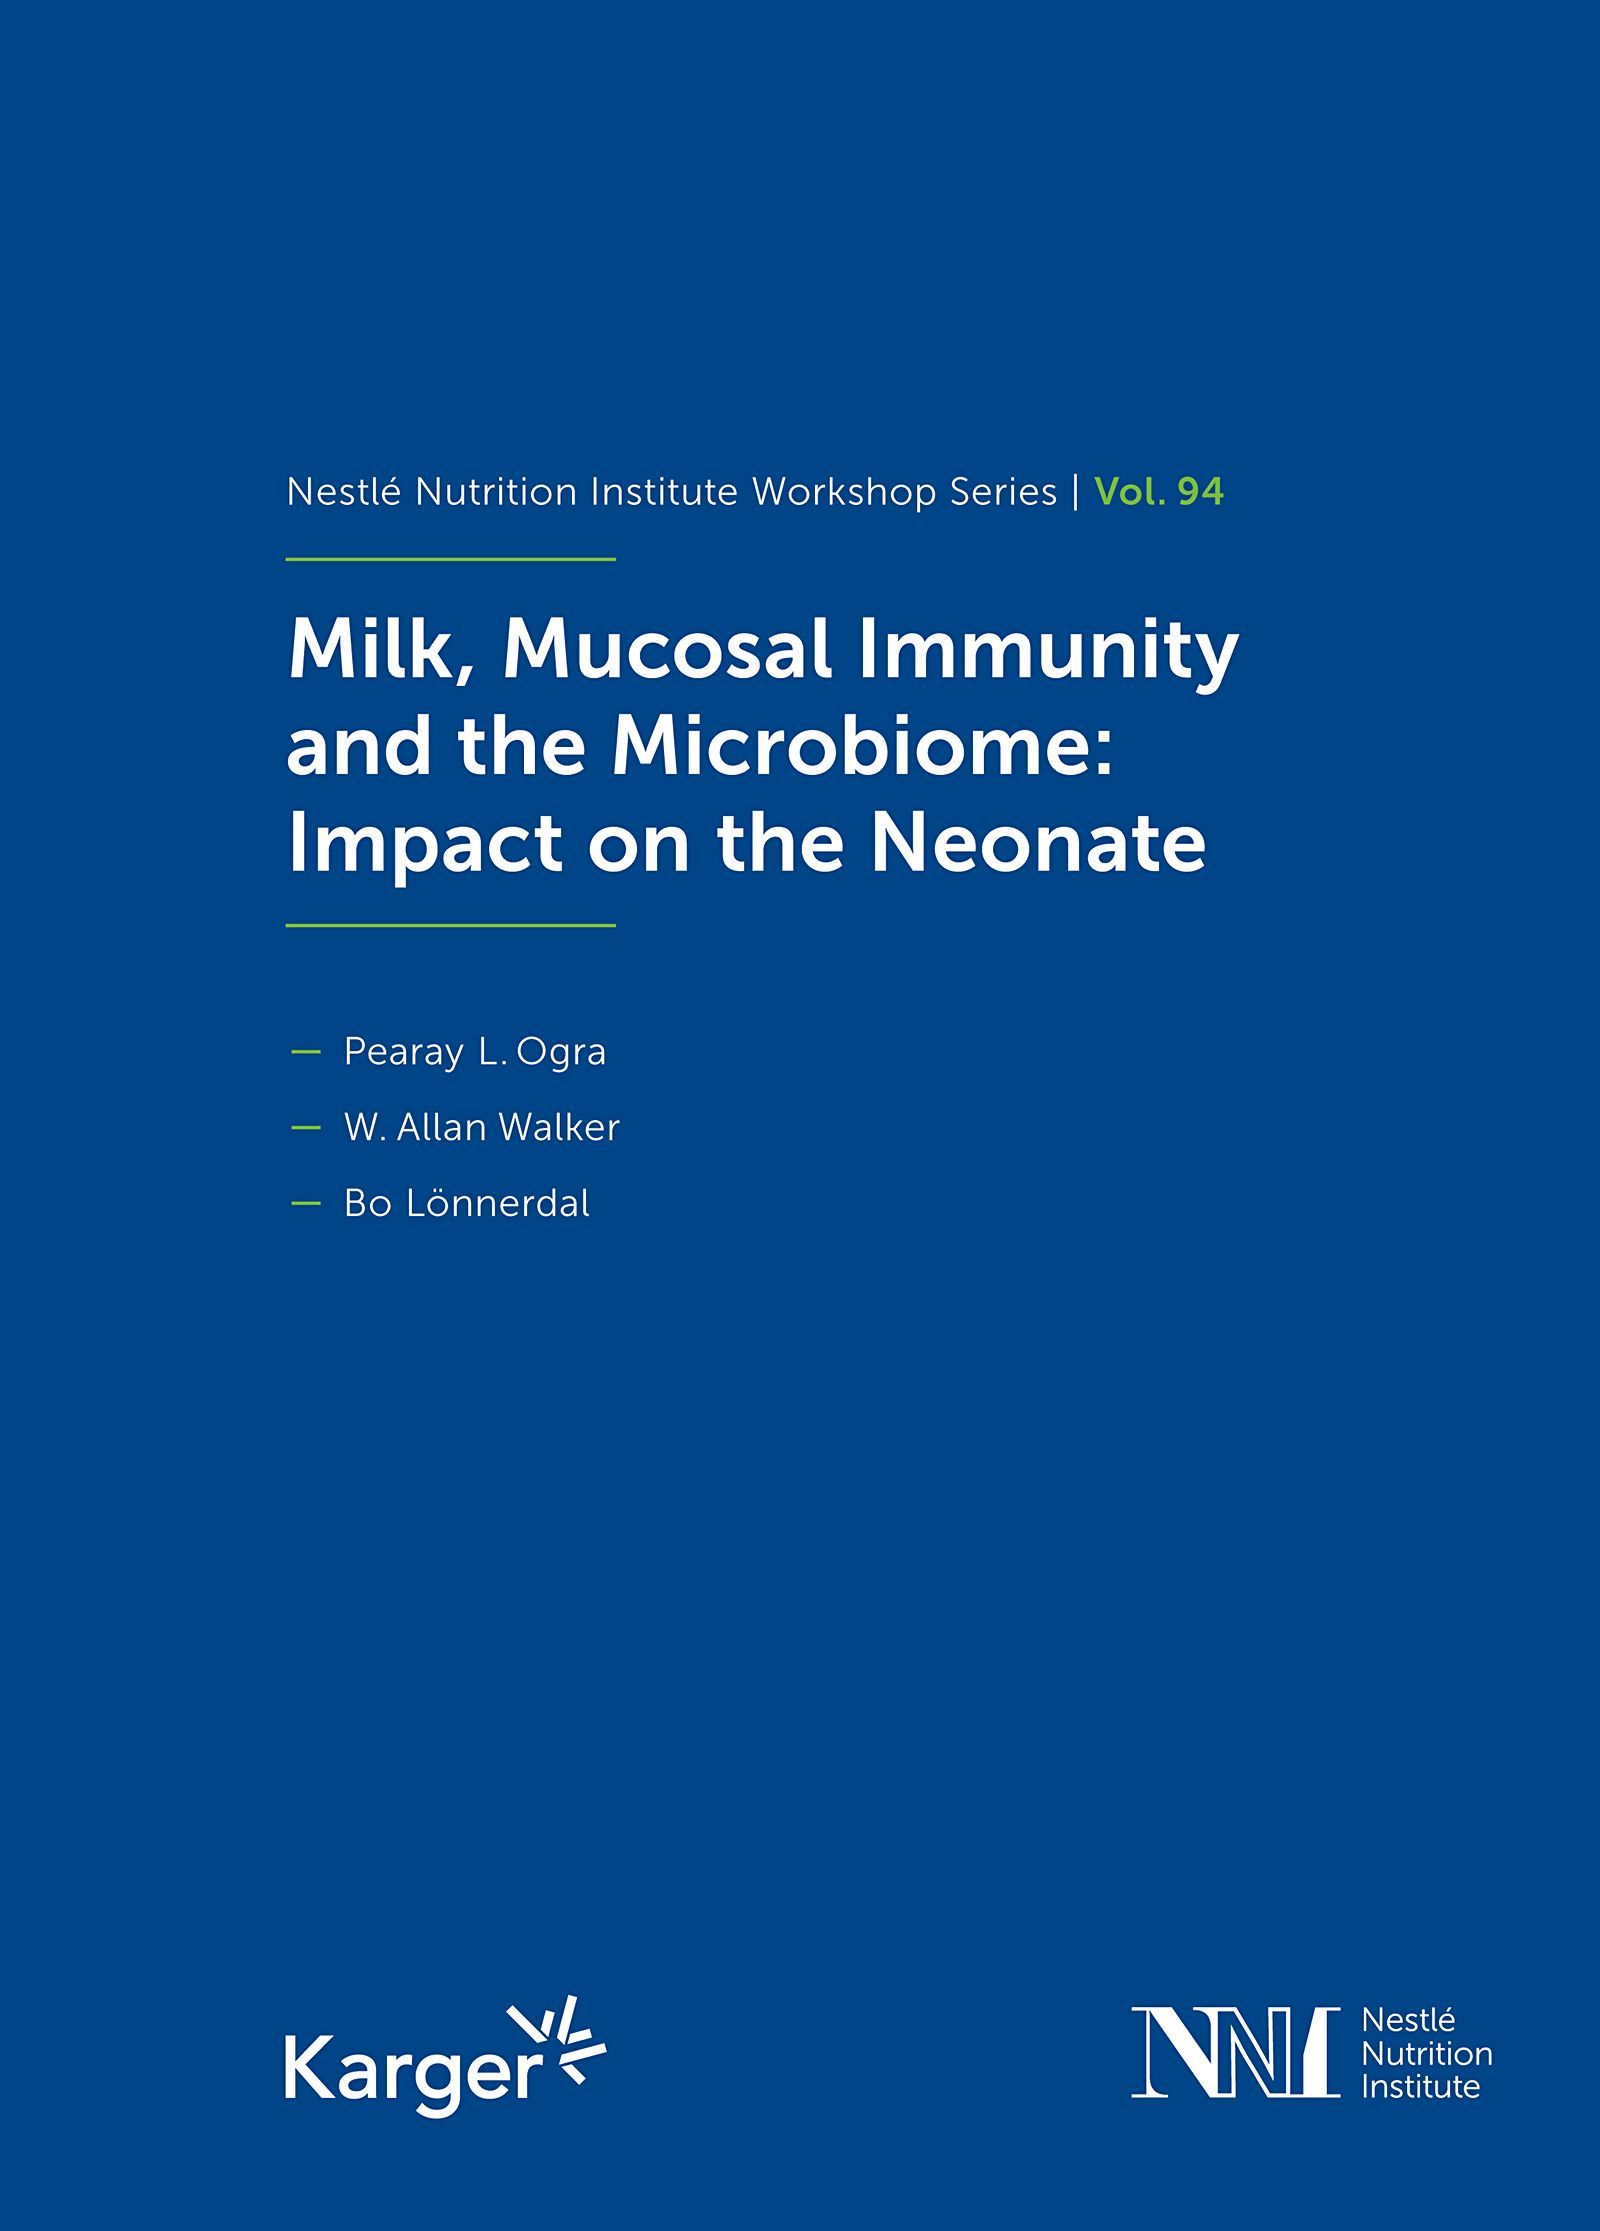 Milk, Mucosal Immunity and the Microbiome: Impact on the Neonate